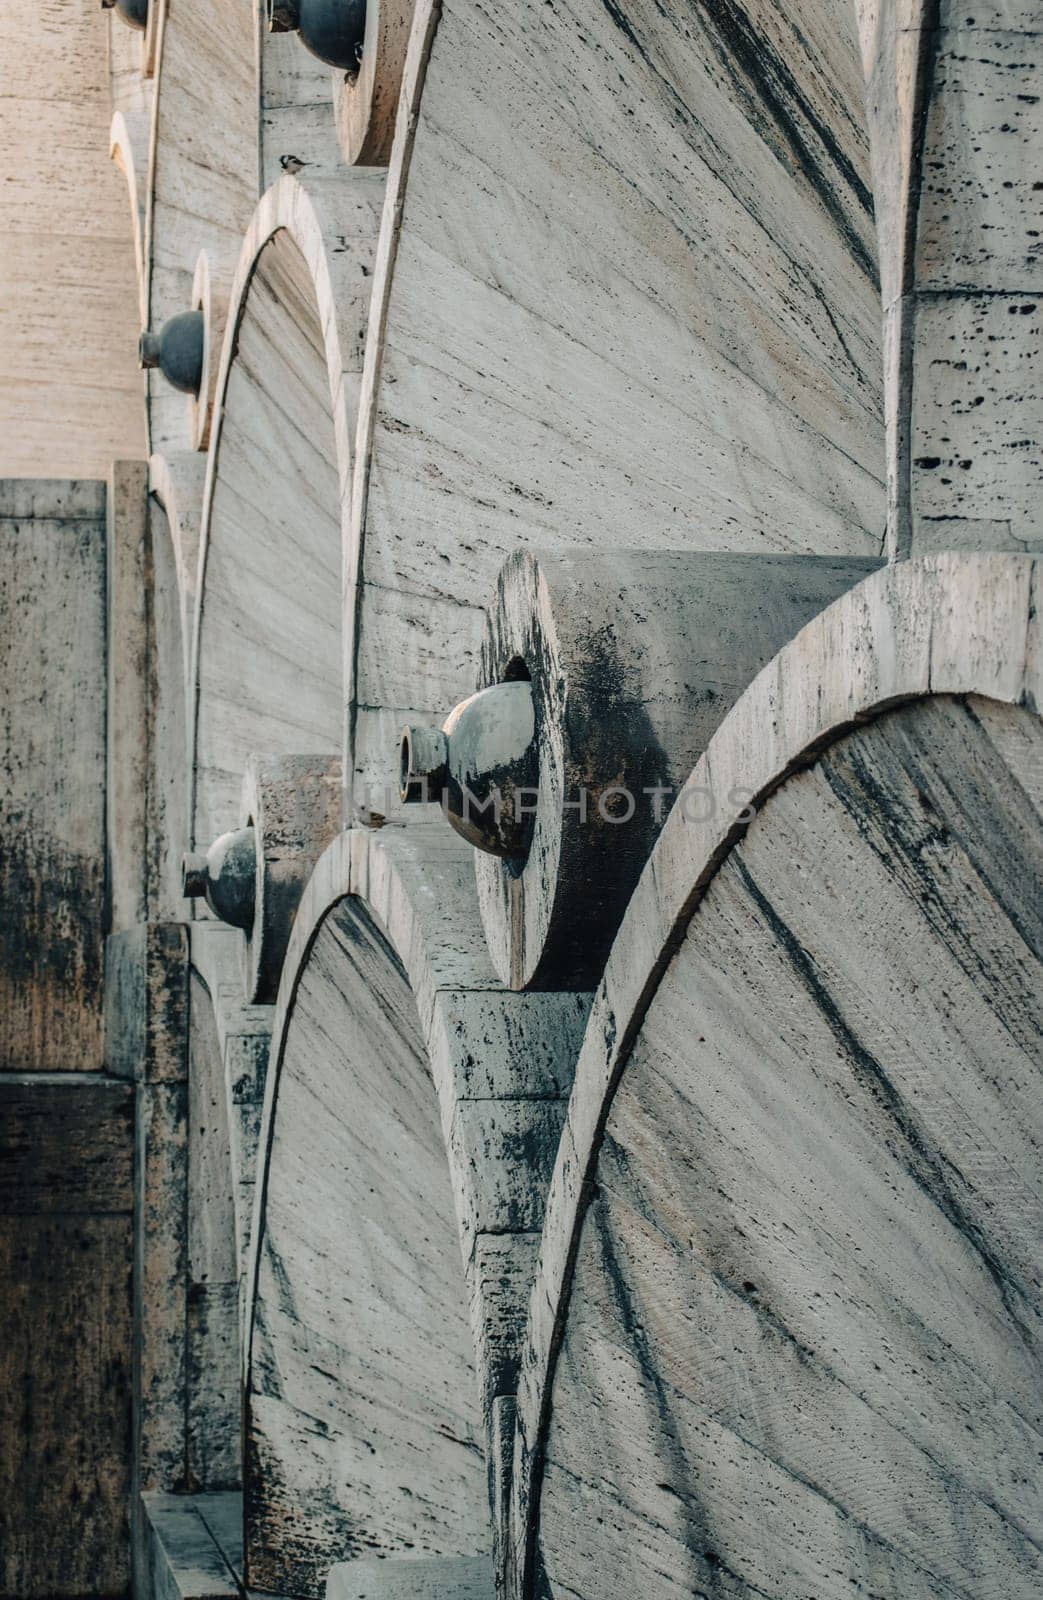 Modern fountain with the circular wheels side view concept photo. Yerevan cascade giant stairway architecture. One of the sightseeing of caucasus city. High quality picture for wallpaper, travel blog